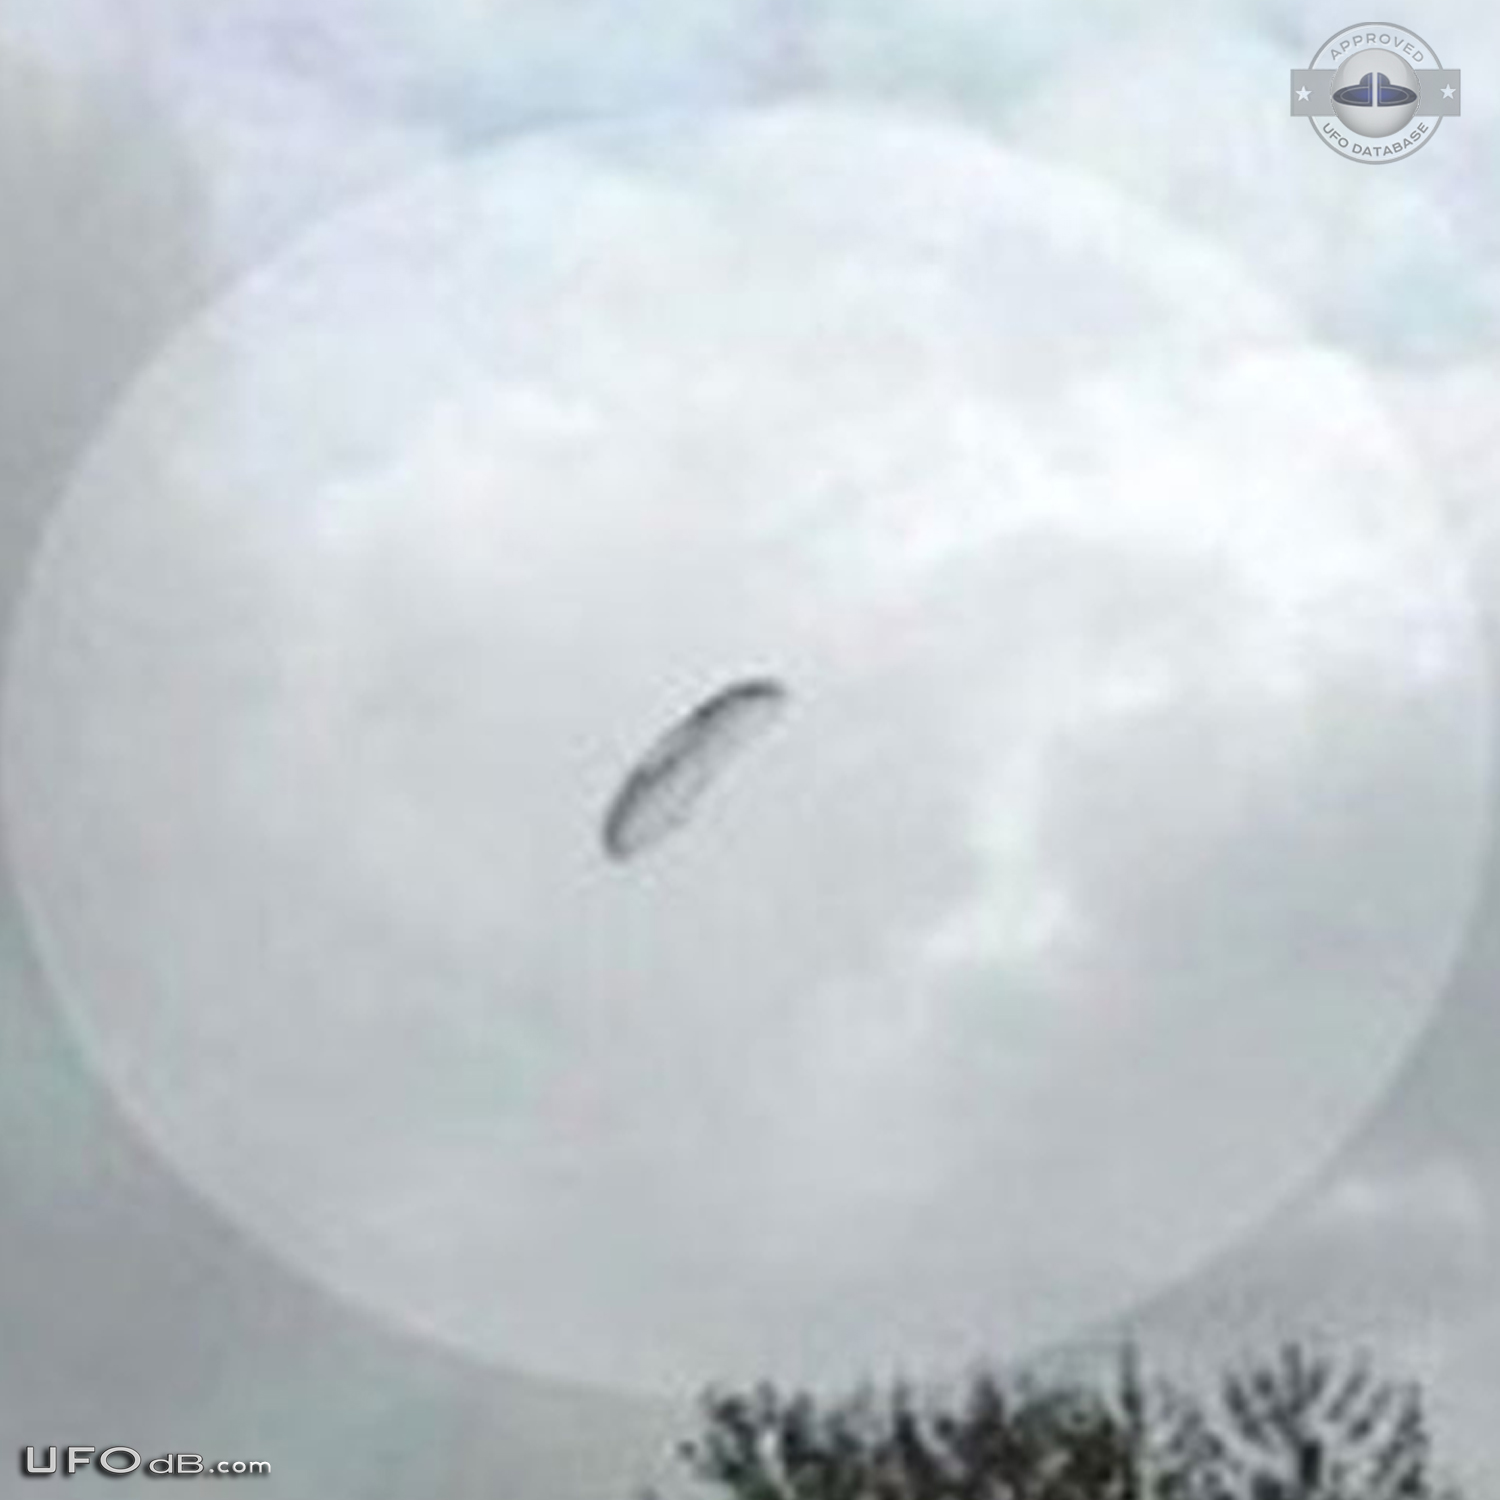 Parachute shaped UFO seen over Claromeco, Tres Arroyos Argentina UFO Picture #620-3